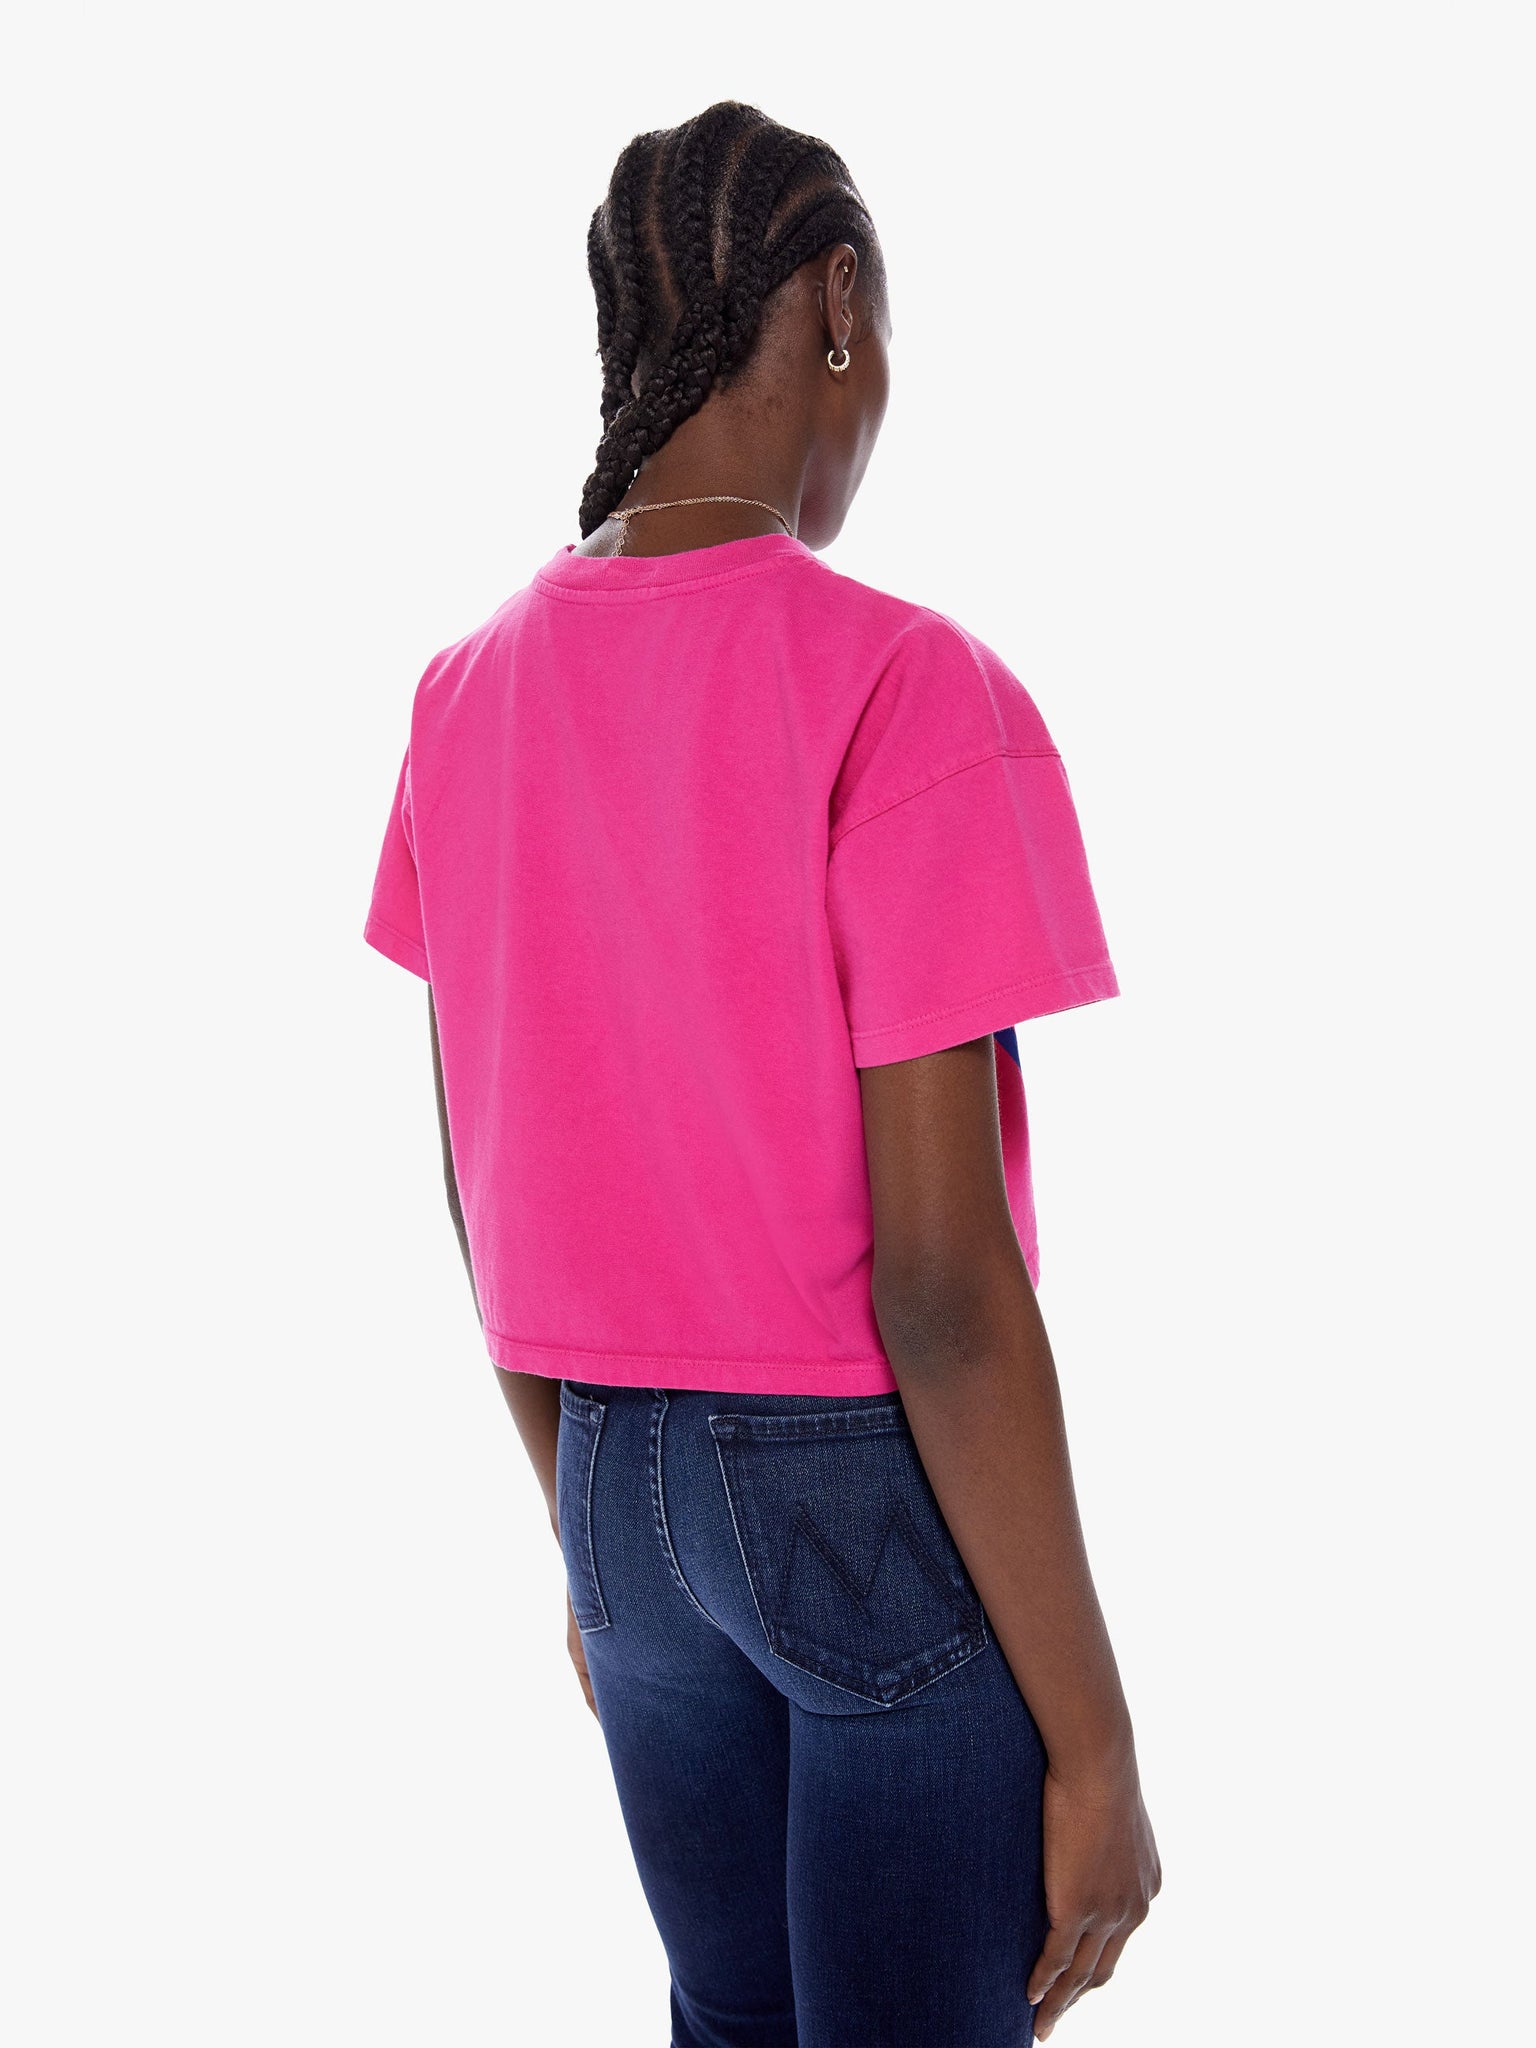 The Grab back crop tee, on the rocks